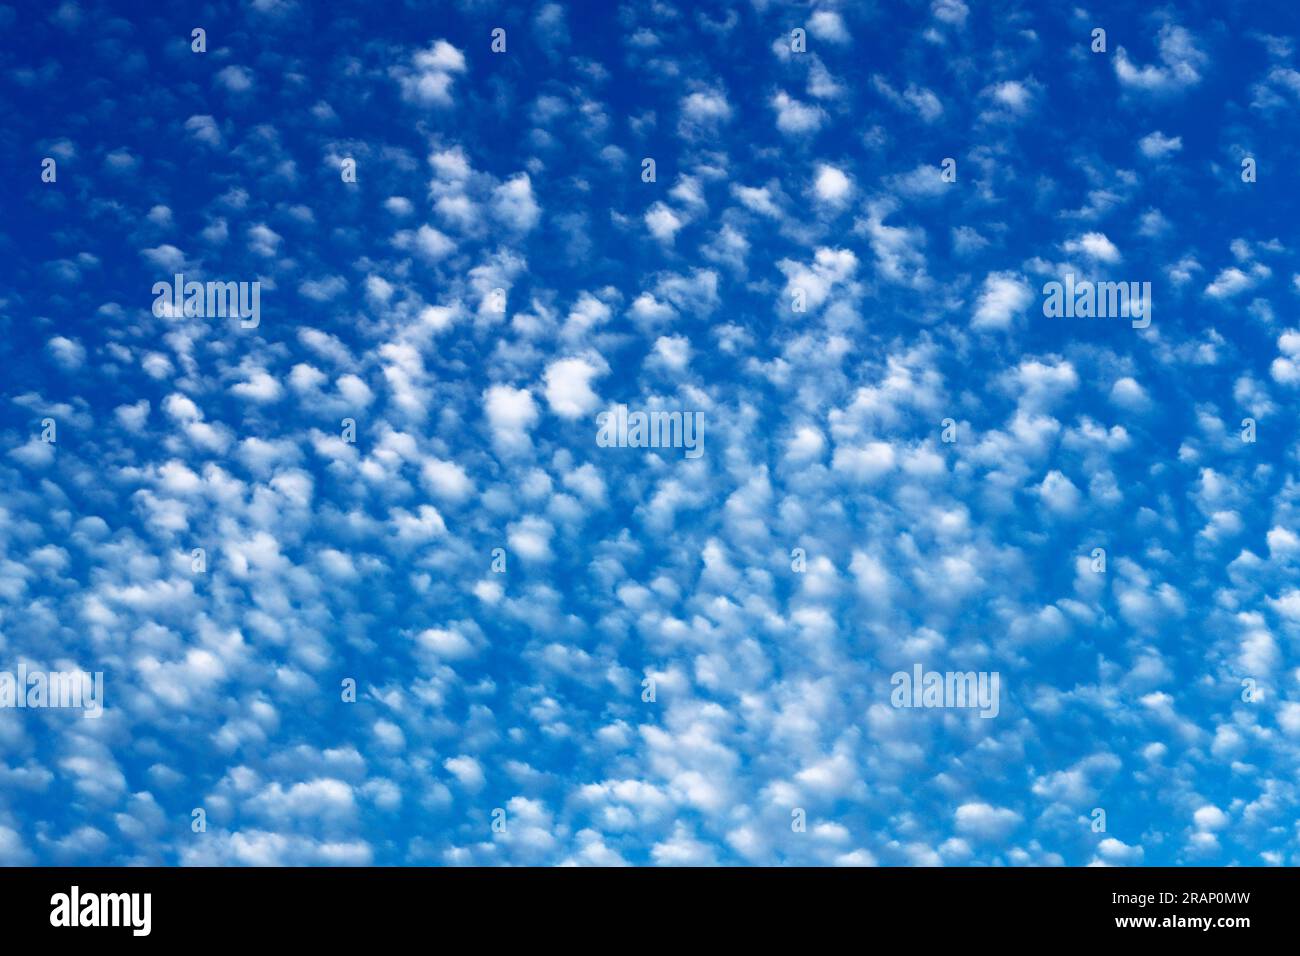 Altocumulus translucidus are medium clouds and persist in stable weather, should they take on a Frosted glass appearance this would suggest rain Stock Photo